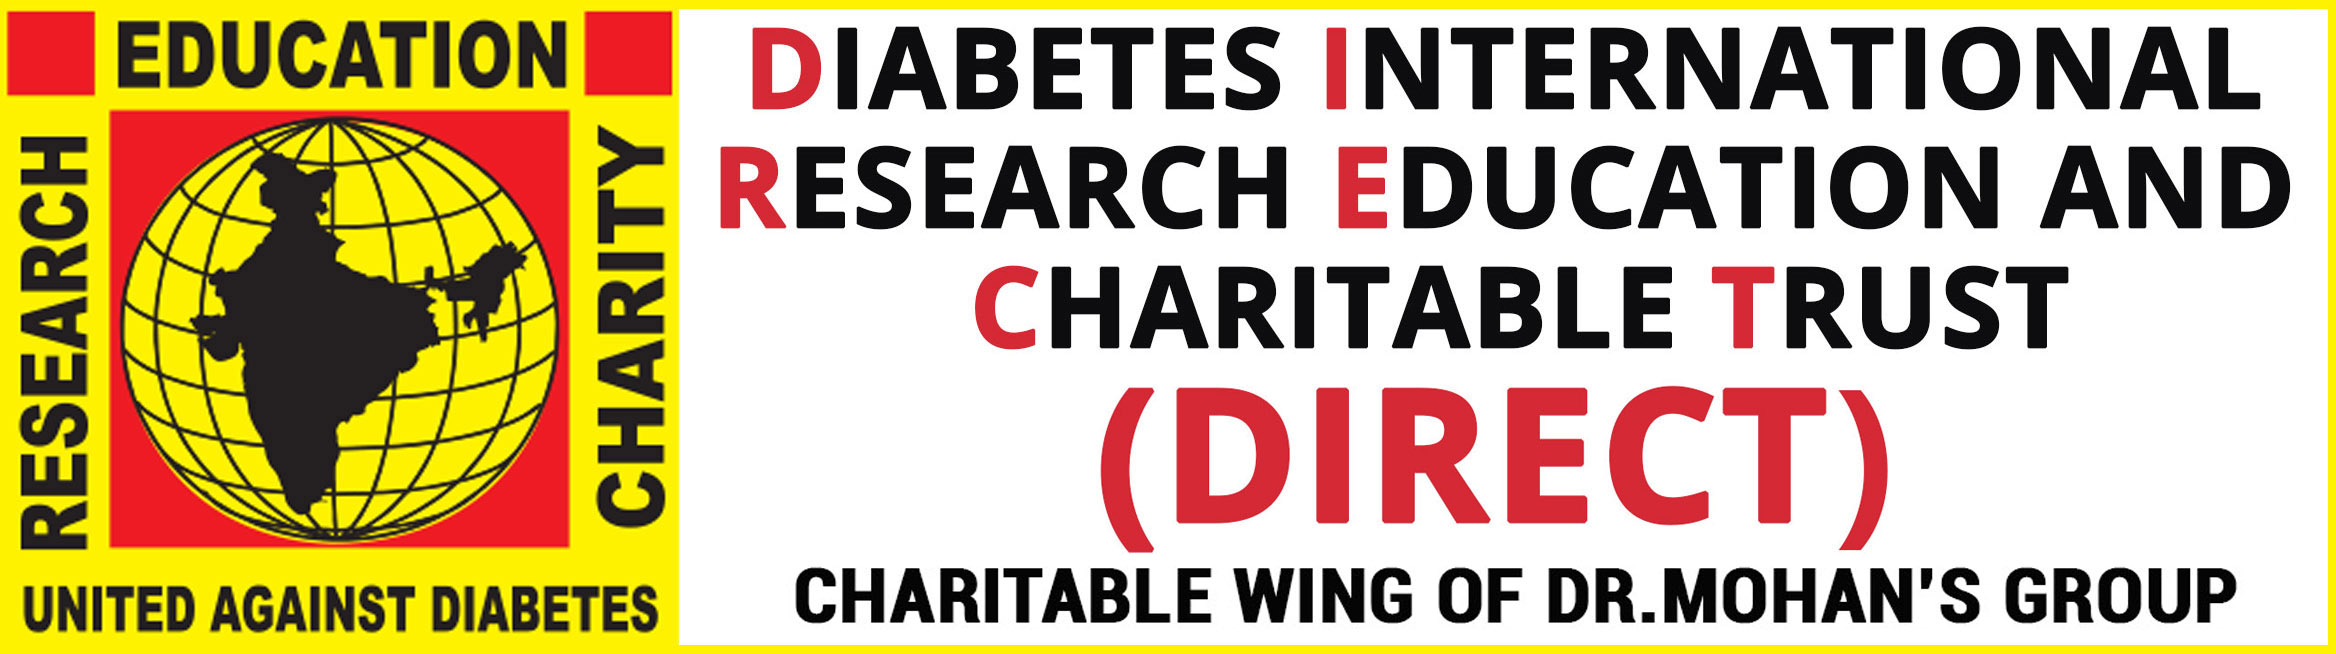 Diabetes International Research Education and Charitable Trust